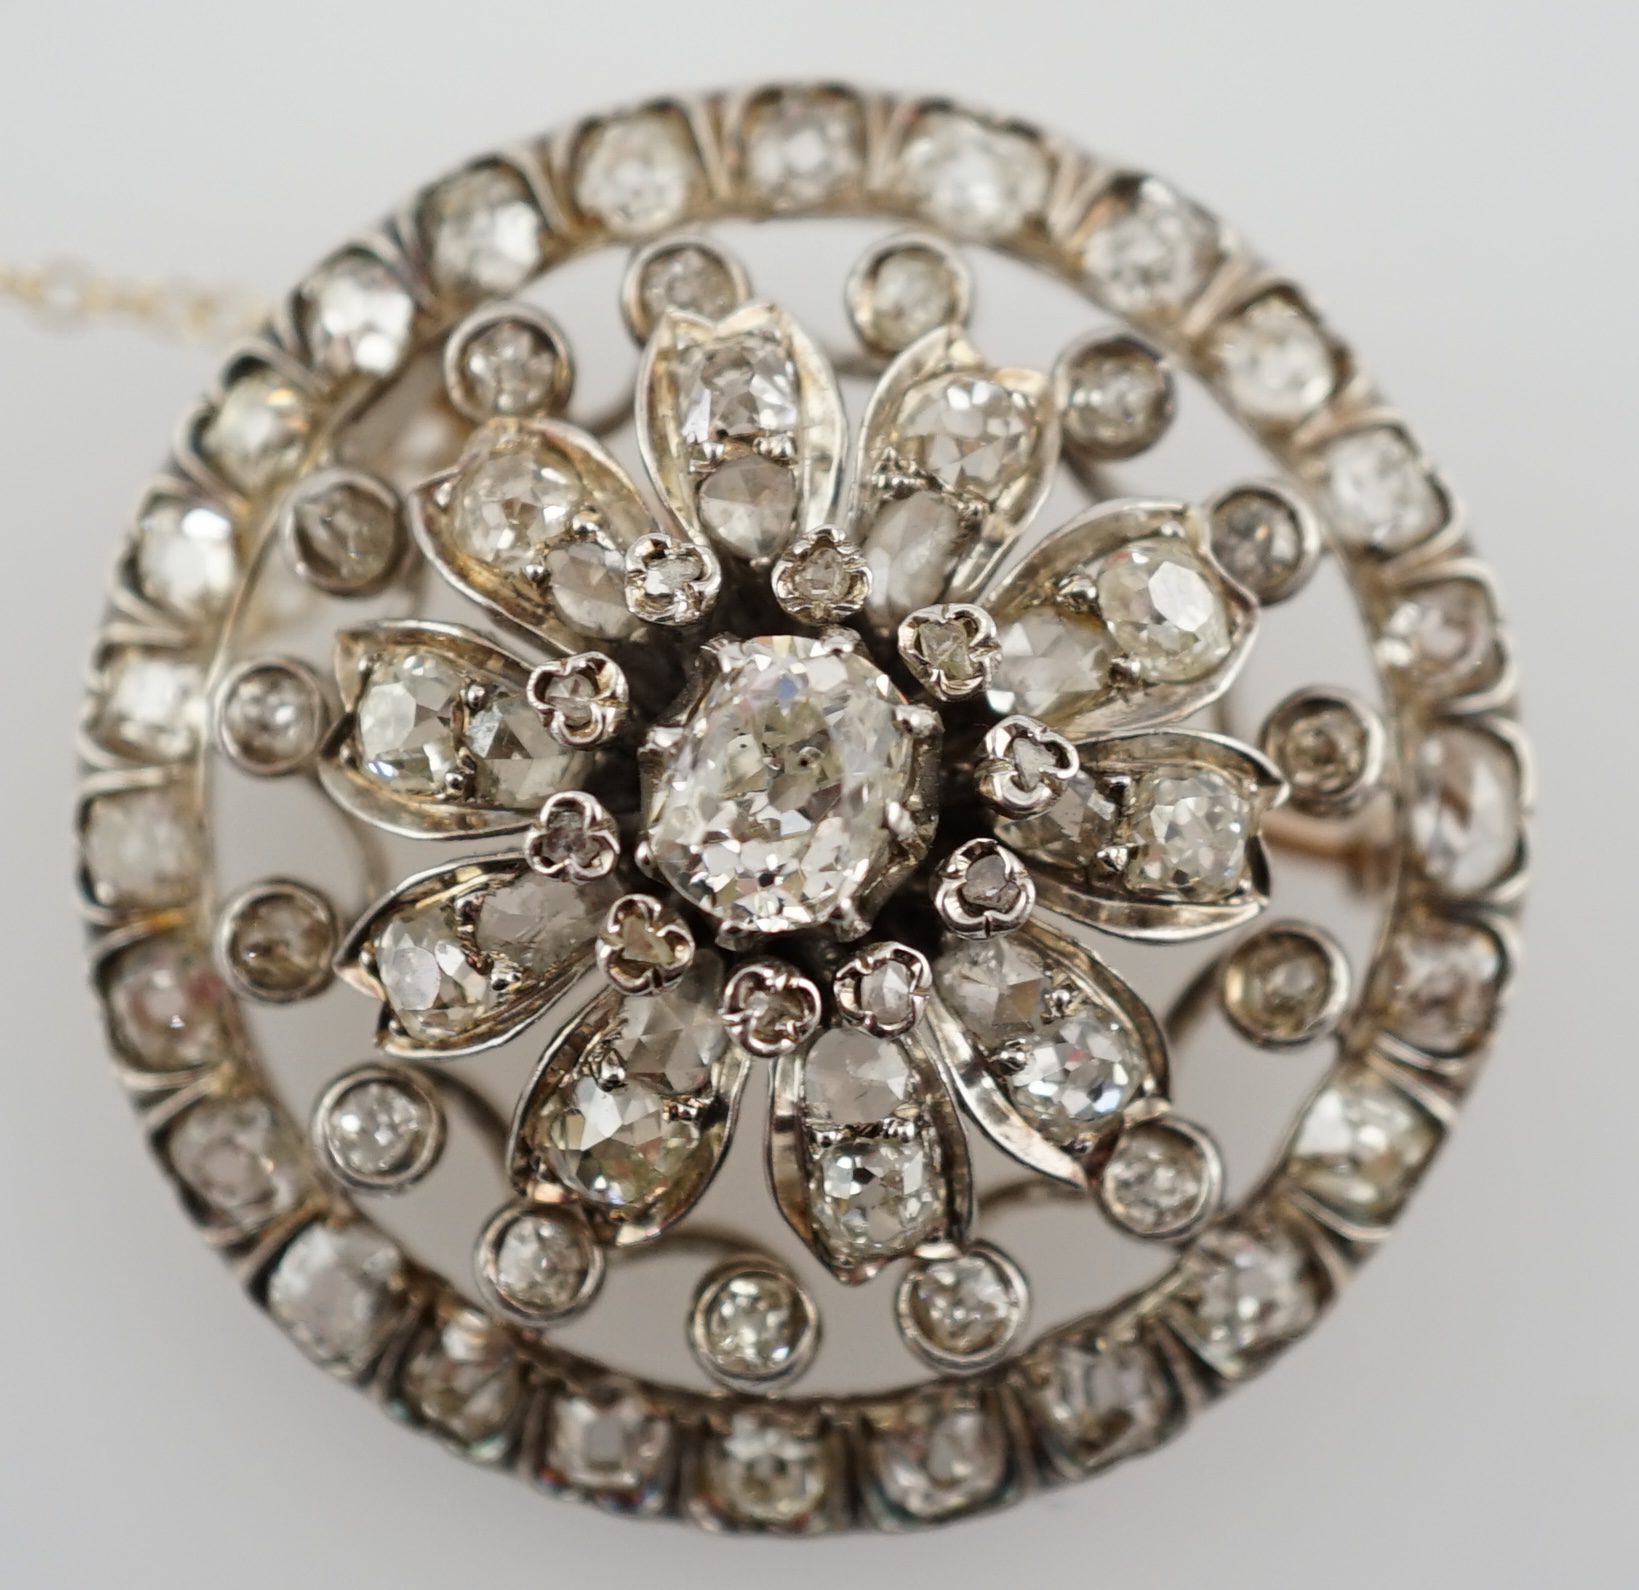 An Edwardian pierced gold and diamond cluster set circular brooch, with central cushion cut stone, diameter 34mm, gross weight 14.4 grams. Condition - fair to good